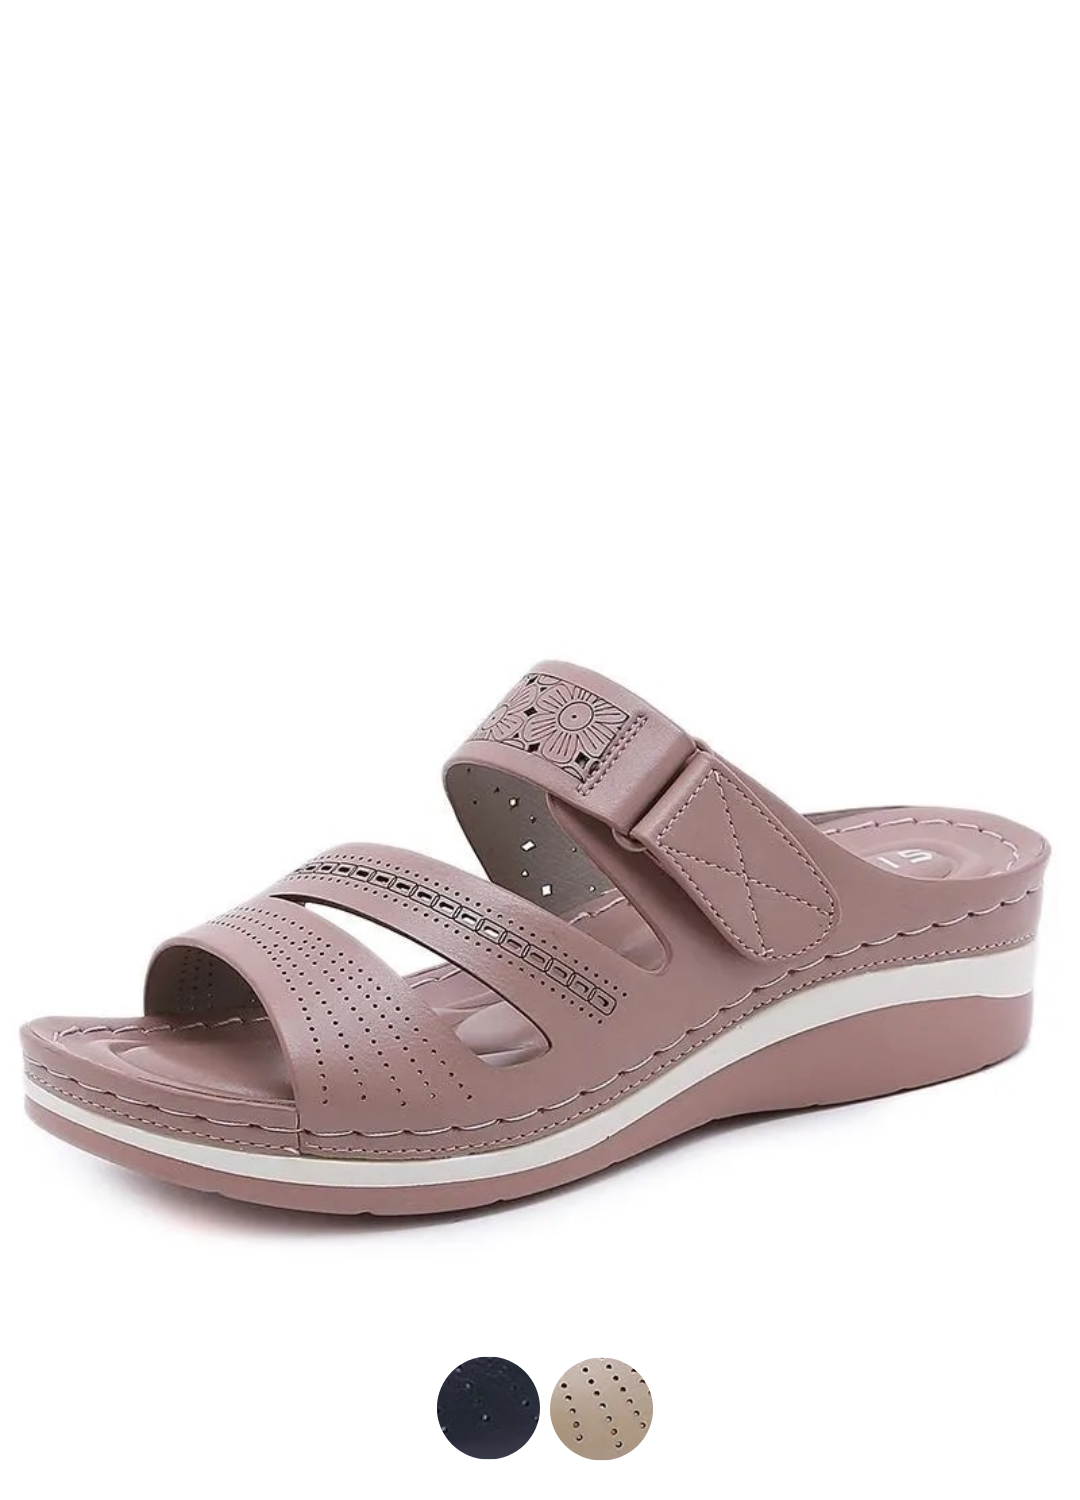 USS Shoes Laty Wedge Sandal | ussshoes.com – USS® Shoes